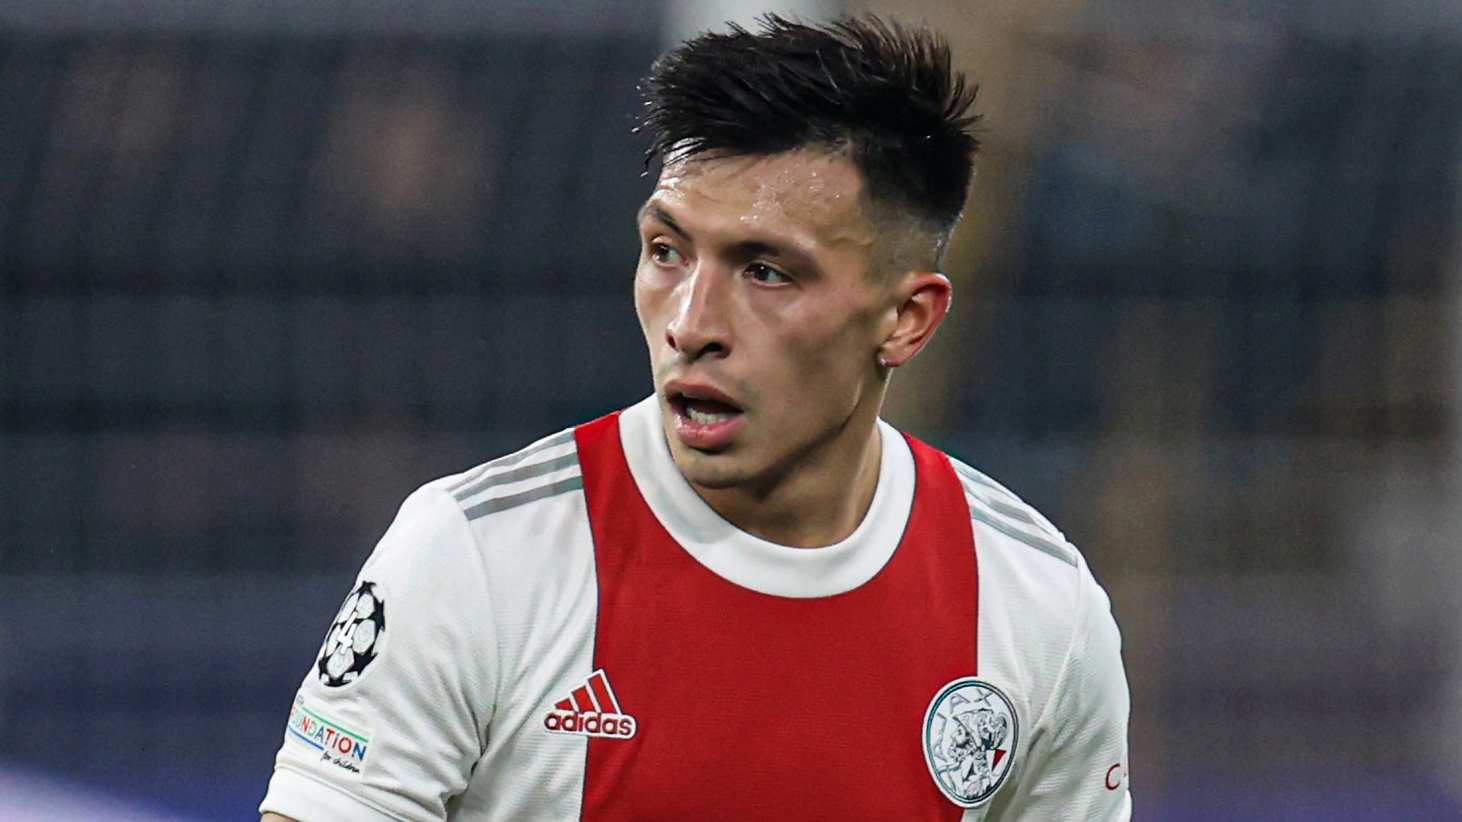 Arsenal News Transfer: 'This Is A Big Upgrade From The Previous One'-Arsenal Has Presented The Third Offer To Desperately Bring A Star To The Team